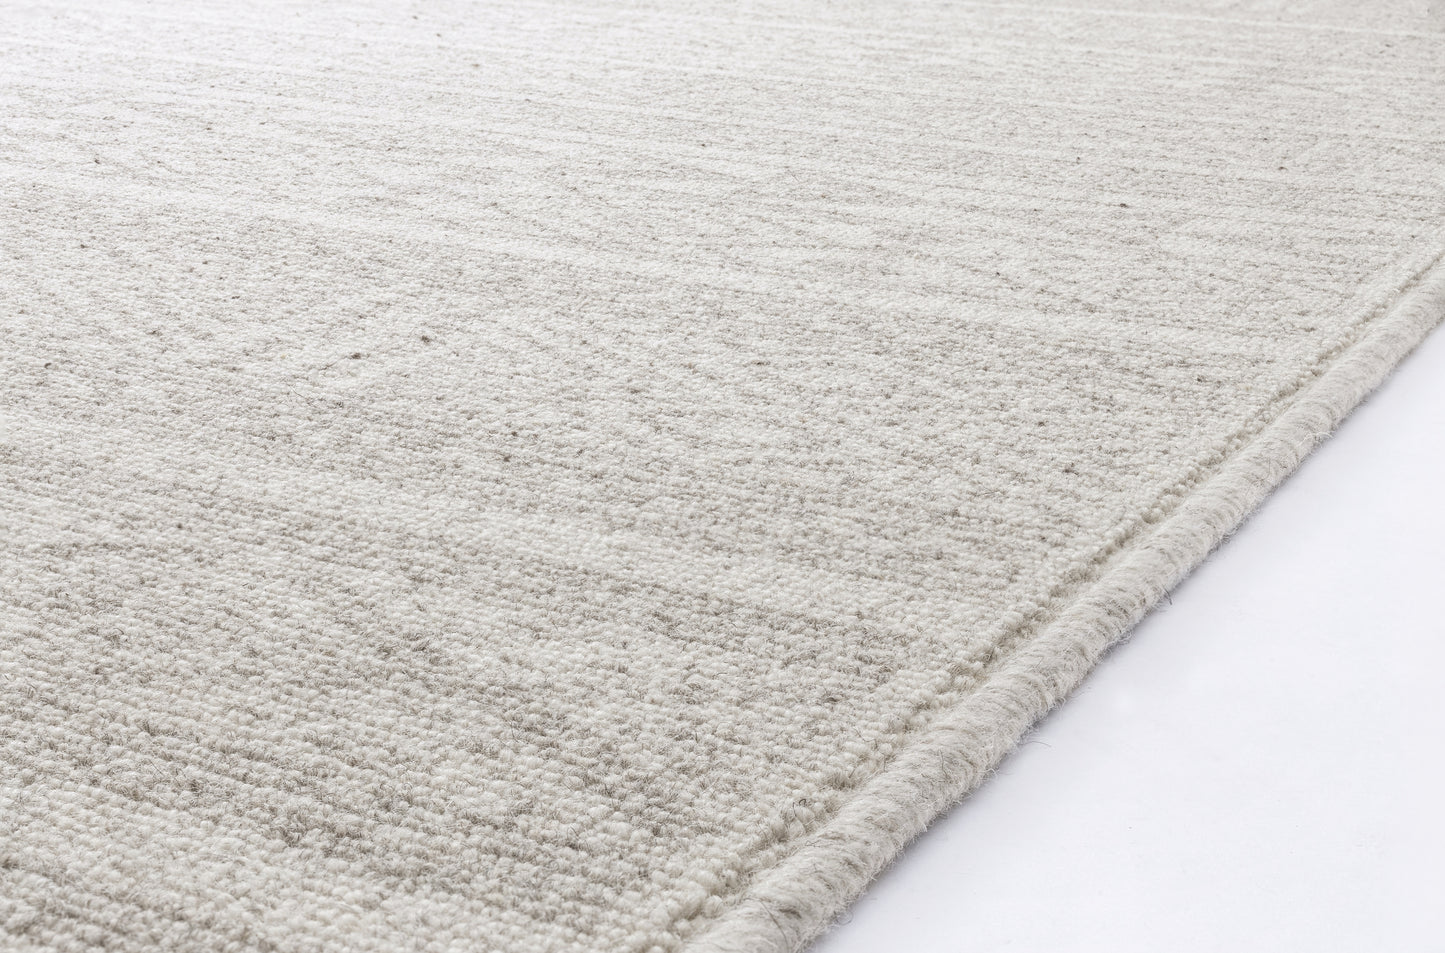 Agnella Rugs Noble PERA Light Grey - 100% Undyed British Wool - Free Delivery